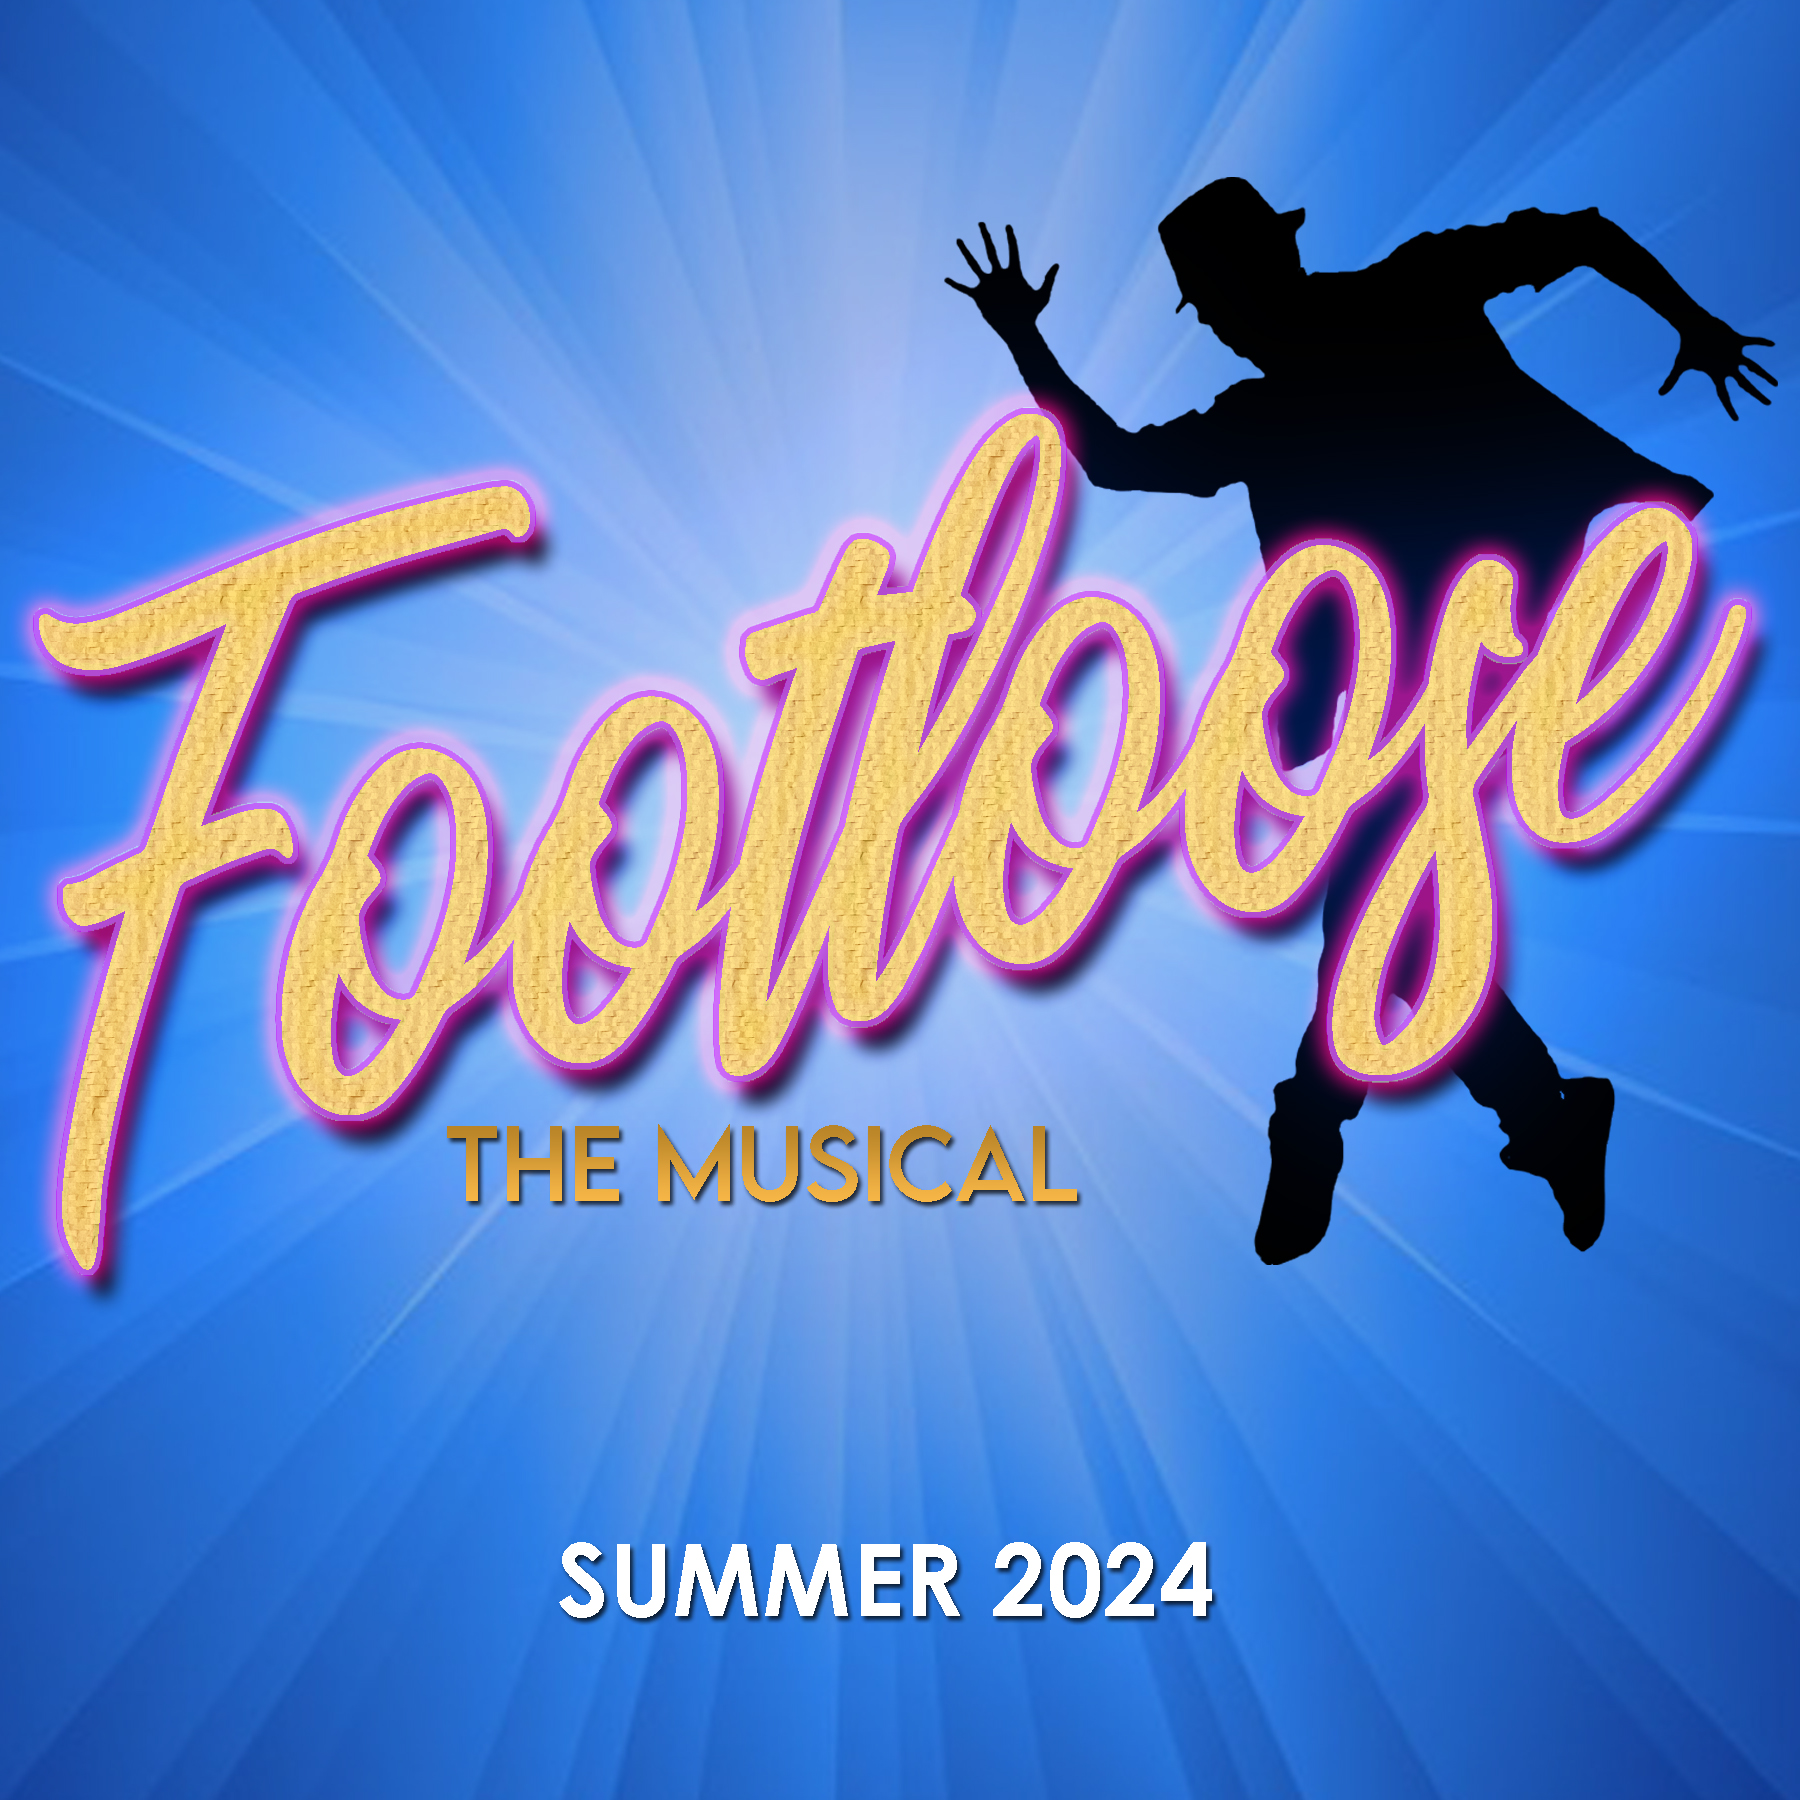 Footloose the Musical live on stage at the Pines Dinner Theatre